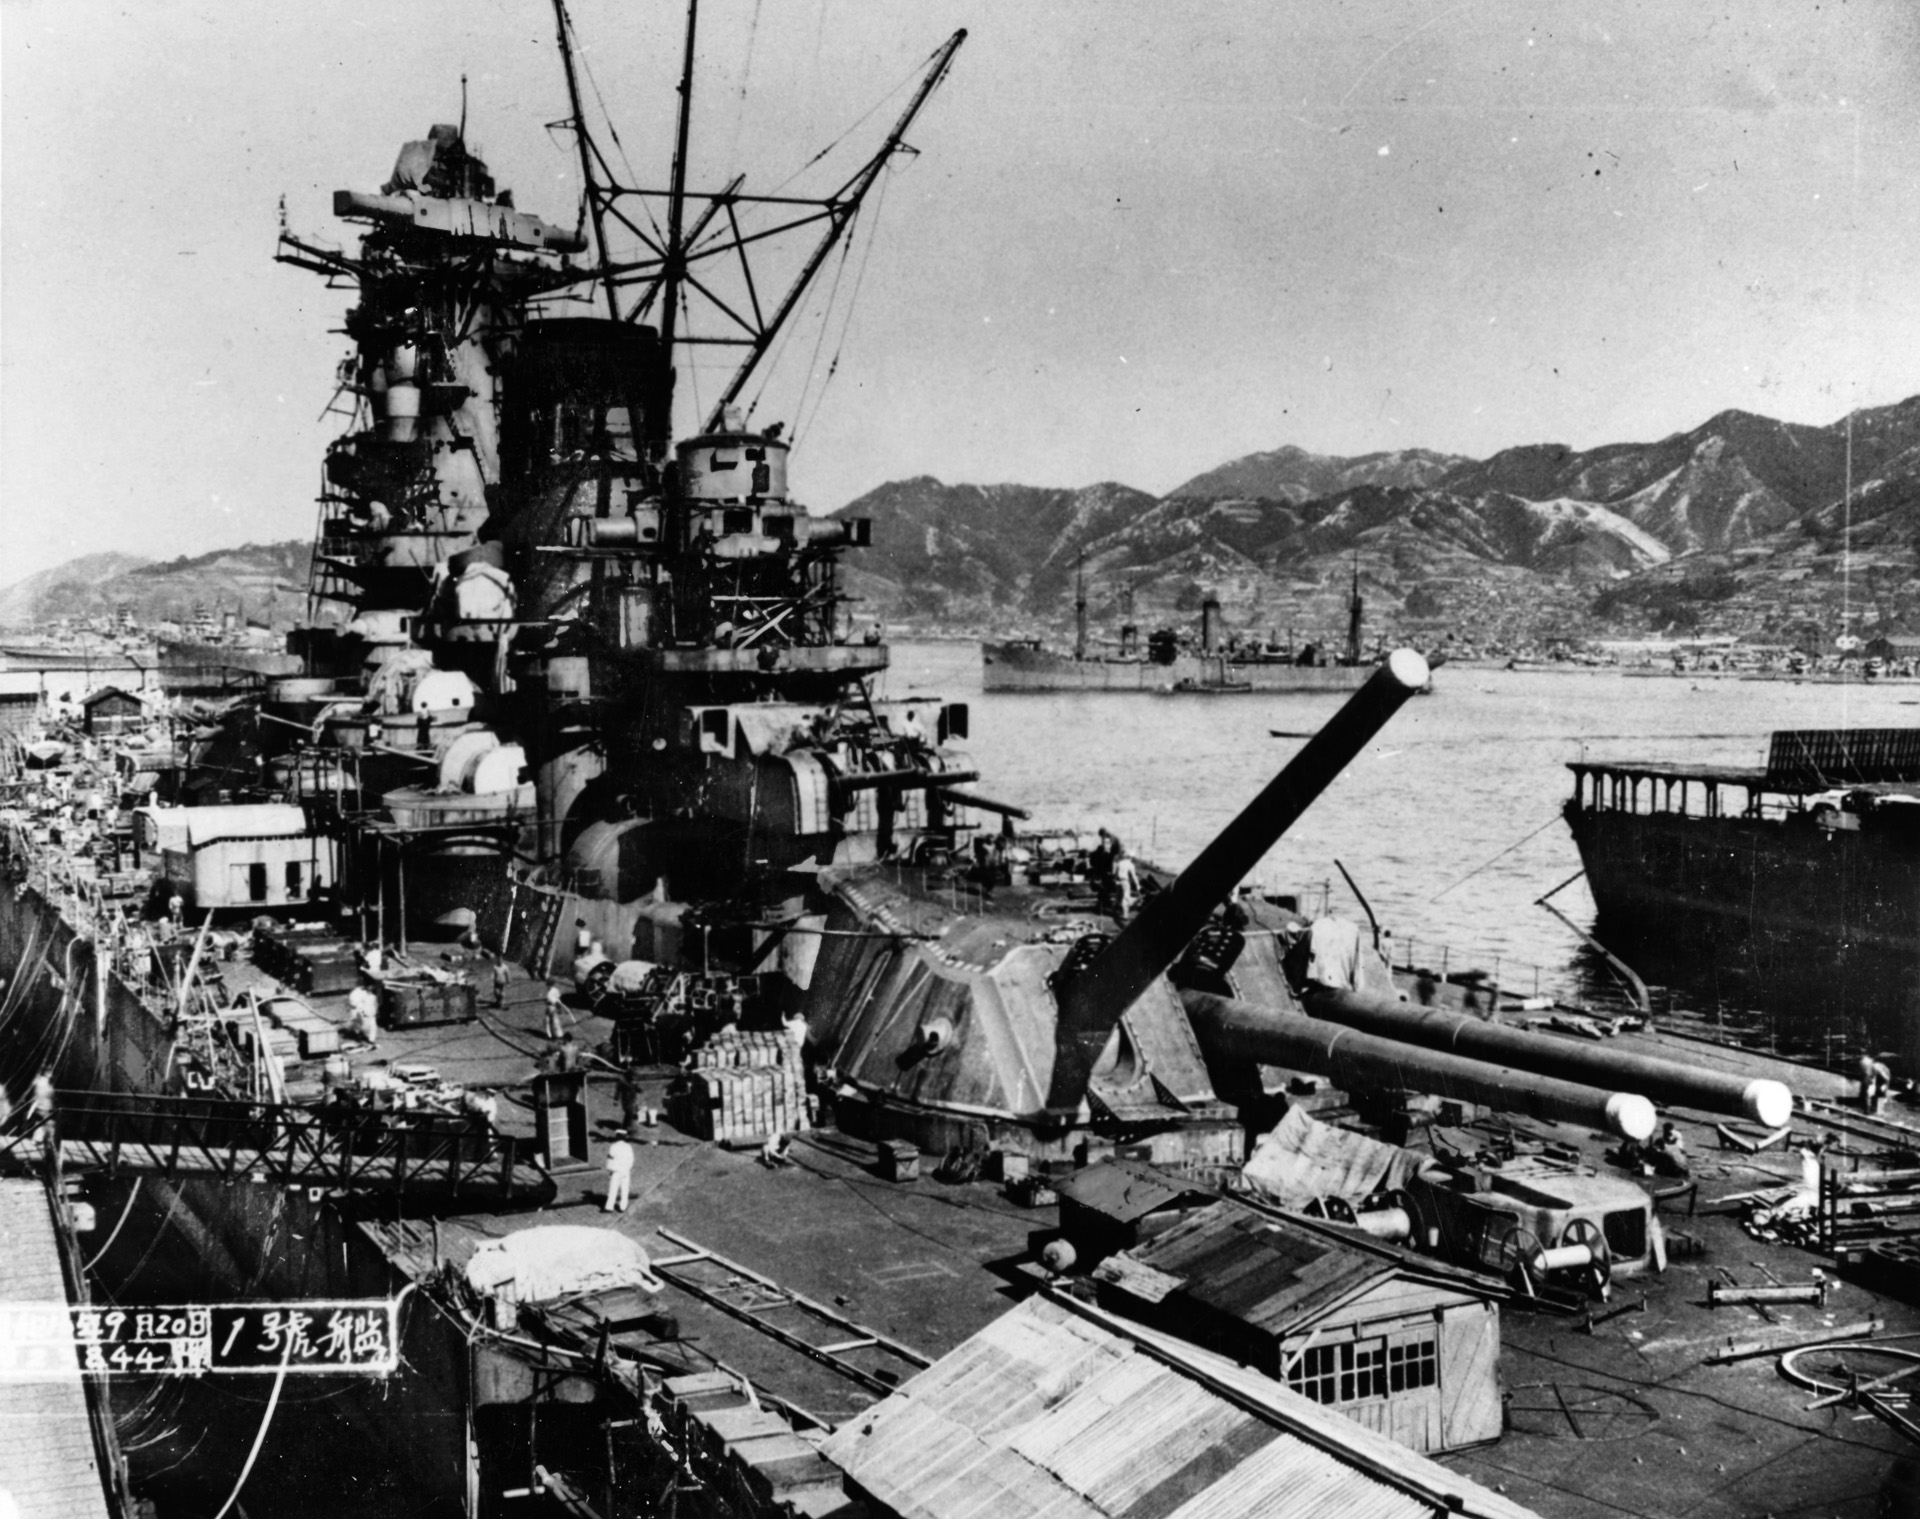 The Yamato, which is shown in the final phase of construction at Kure Naval Base, boasted nine 18-inch main guns that could hurl 3,200-pound shells as far as 25 miles. 